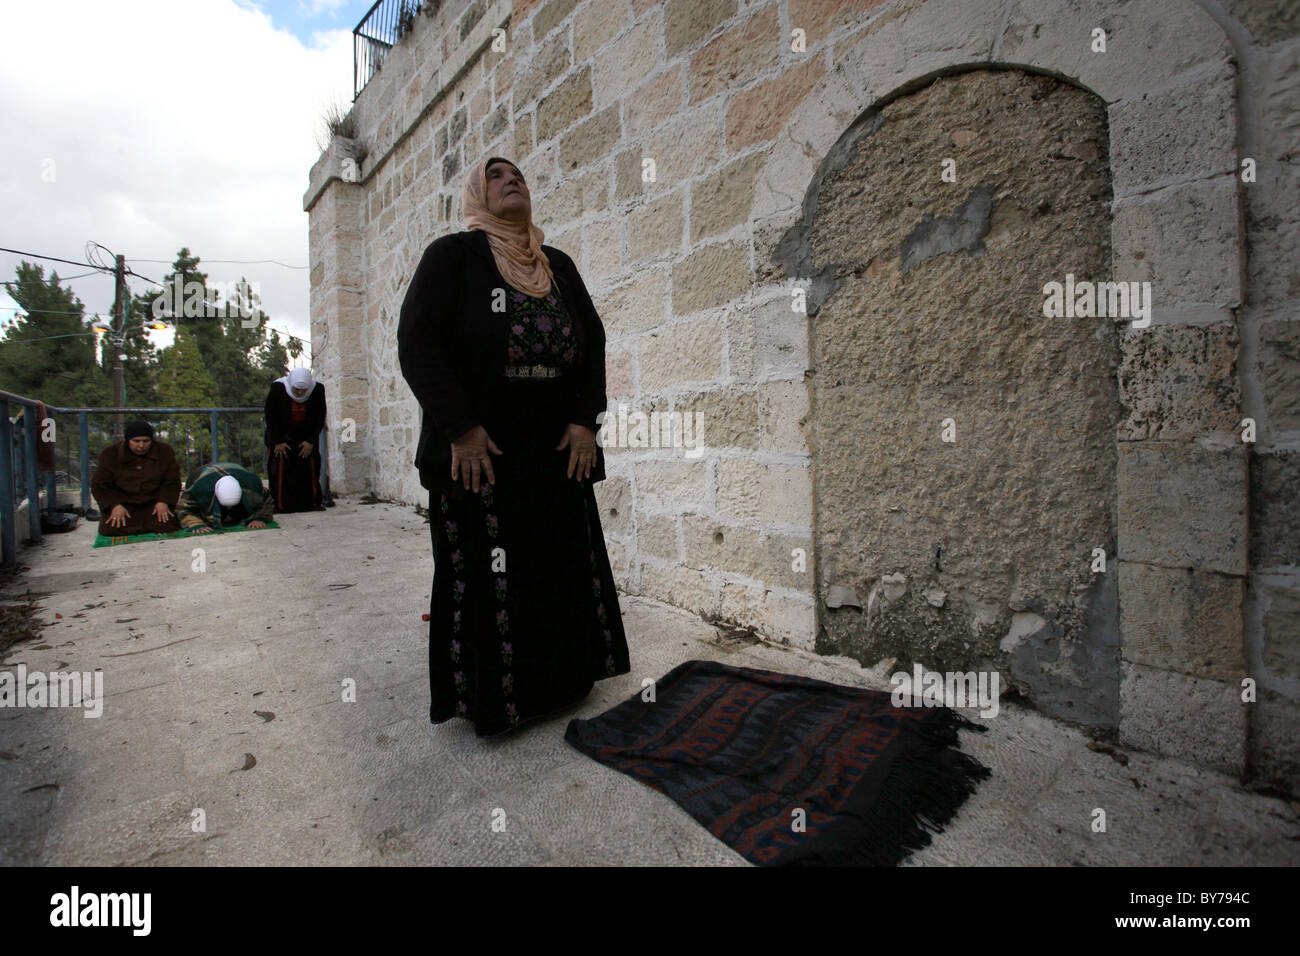 Palestinian women praying as they revisits their family's village in Ein Karem or Ain Kerem a neighborhood in southwest Jerusalem which was depopulated by Arab inhabitants and repopulated by Jewish immigrants during the 1948 Arab-Israeli War. Israel Stock Photo